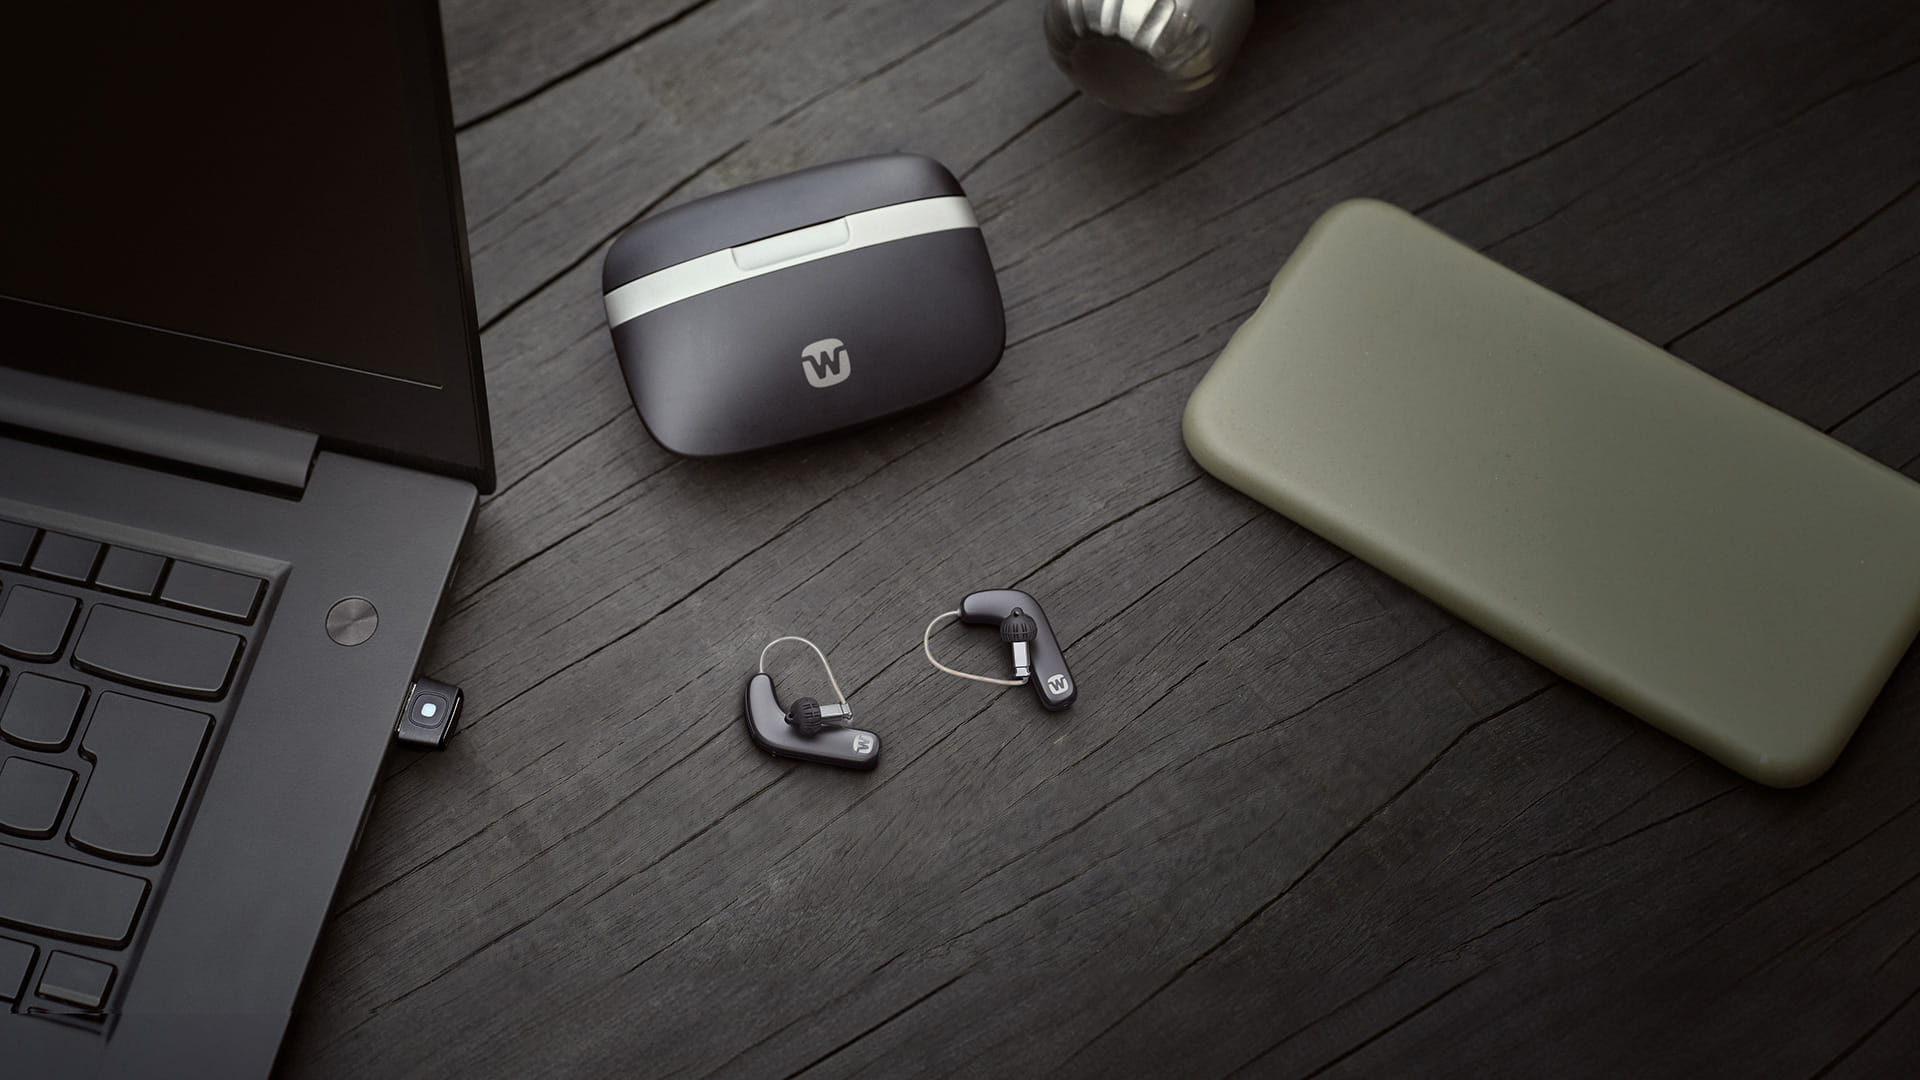 Widex SmartRIC hearing aids with portable charger and SoundConnect